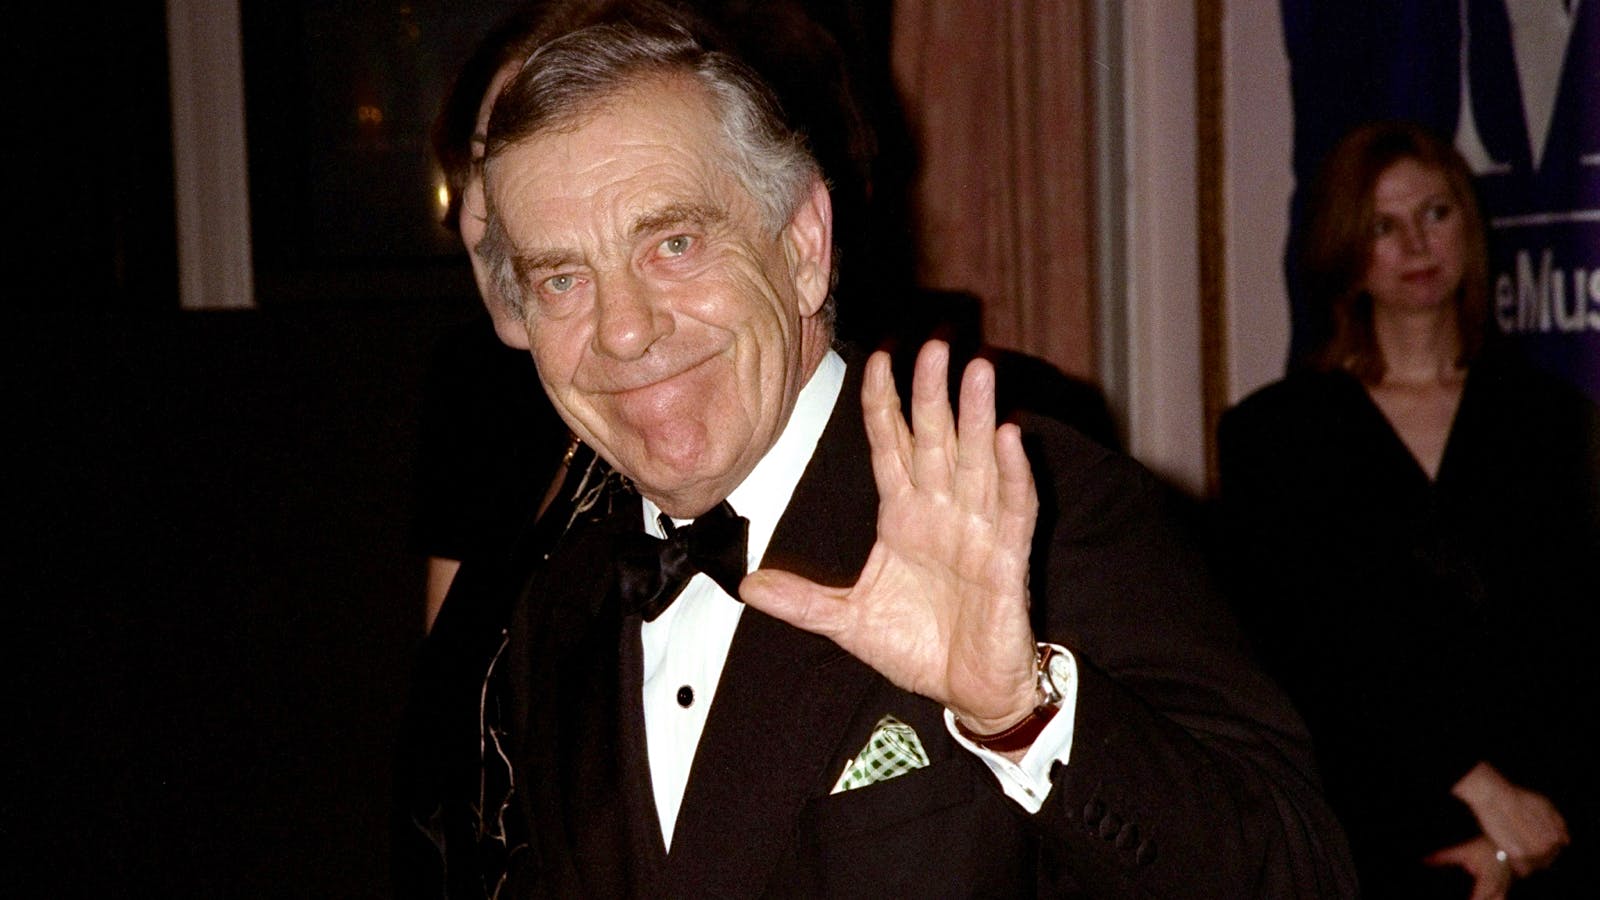 Journalist Morley Safer, Who Highlighted Red Wine’s Potential Health Benefits, Dies at 84